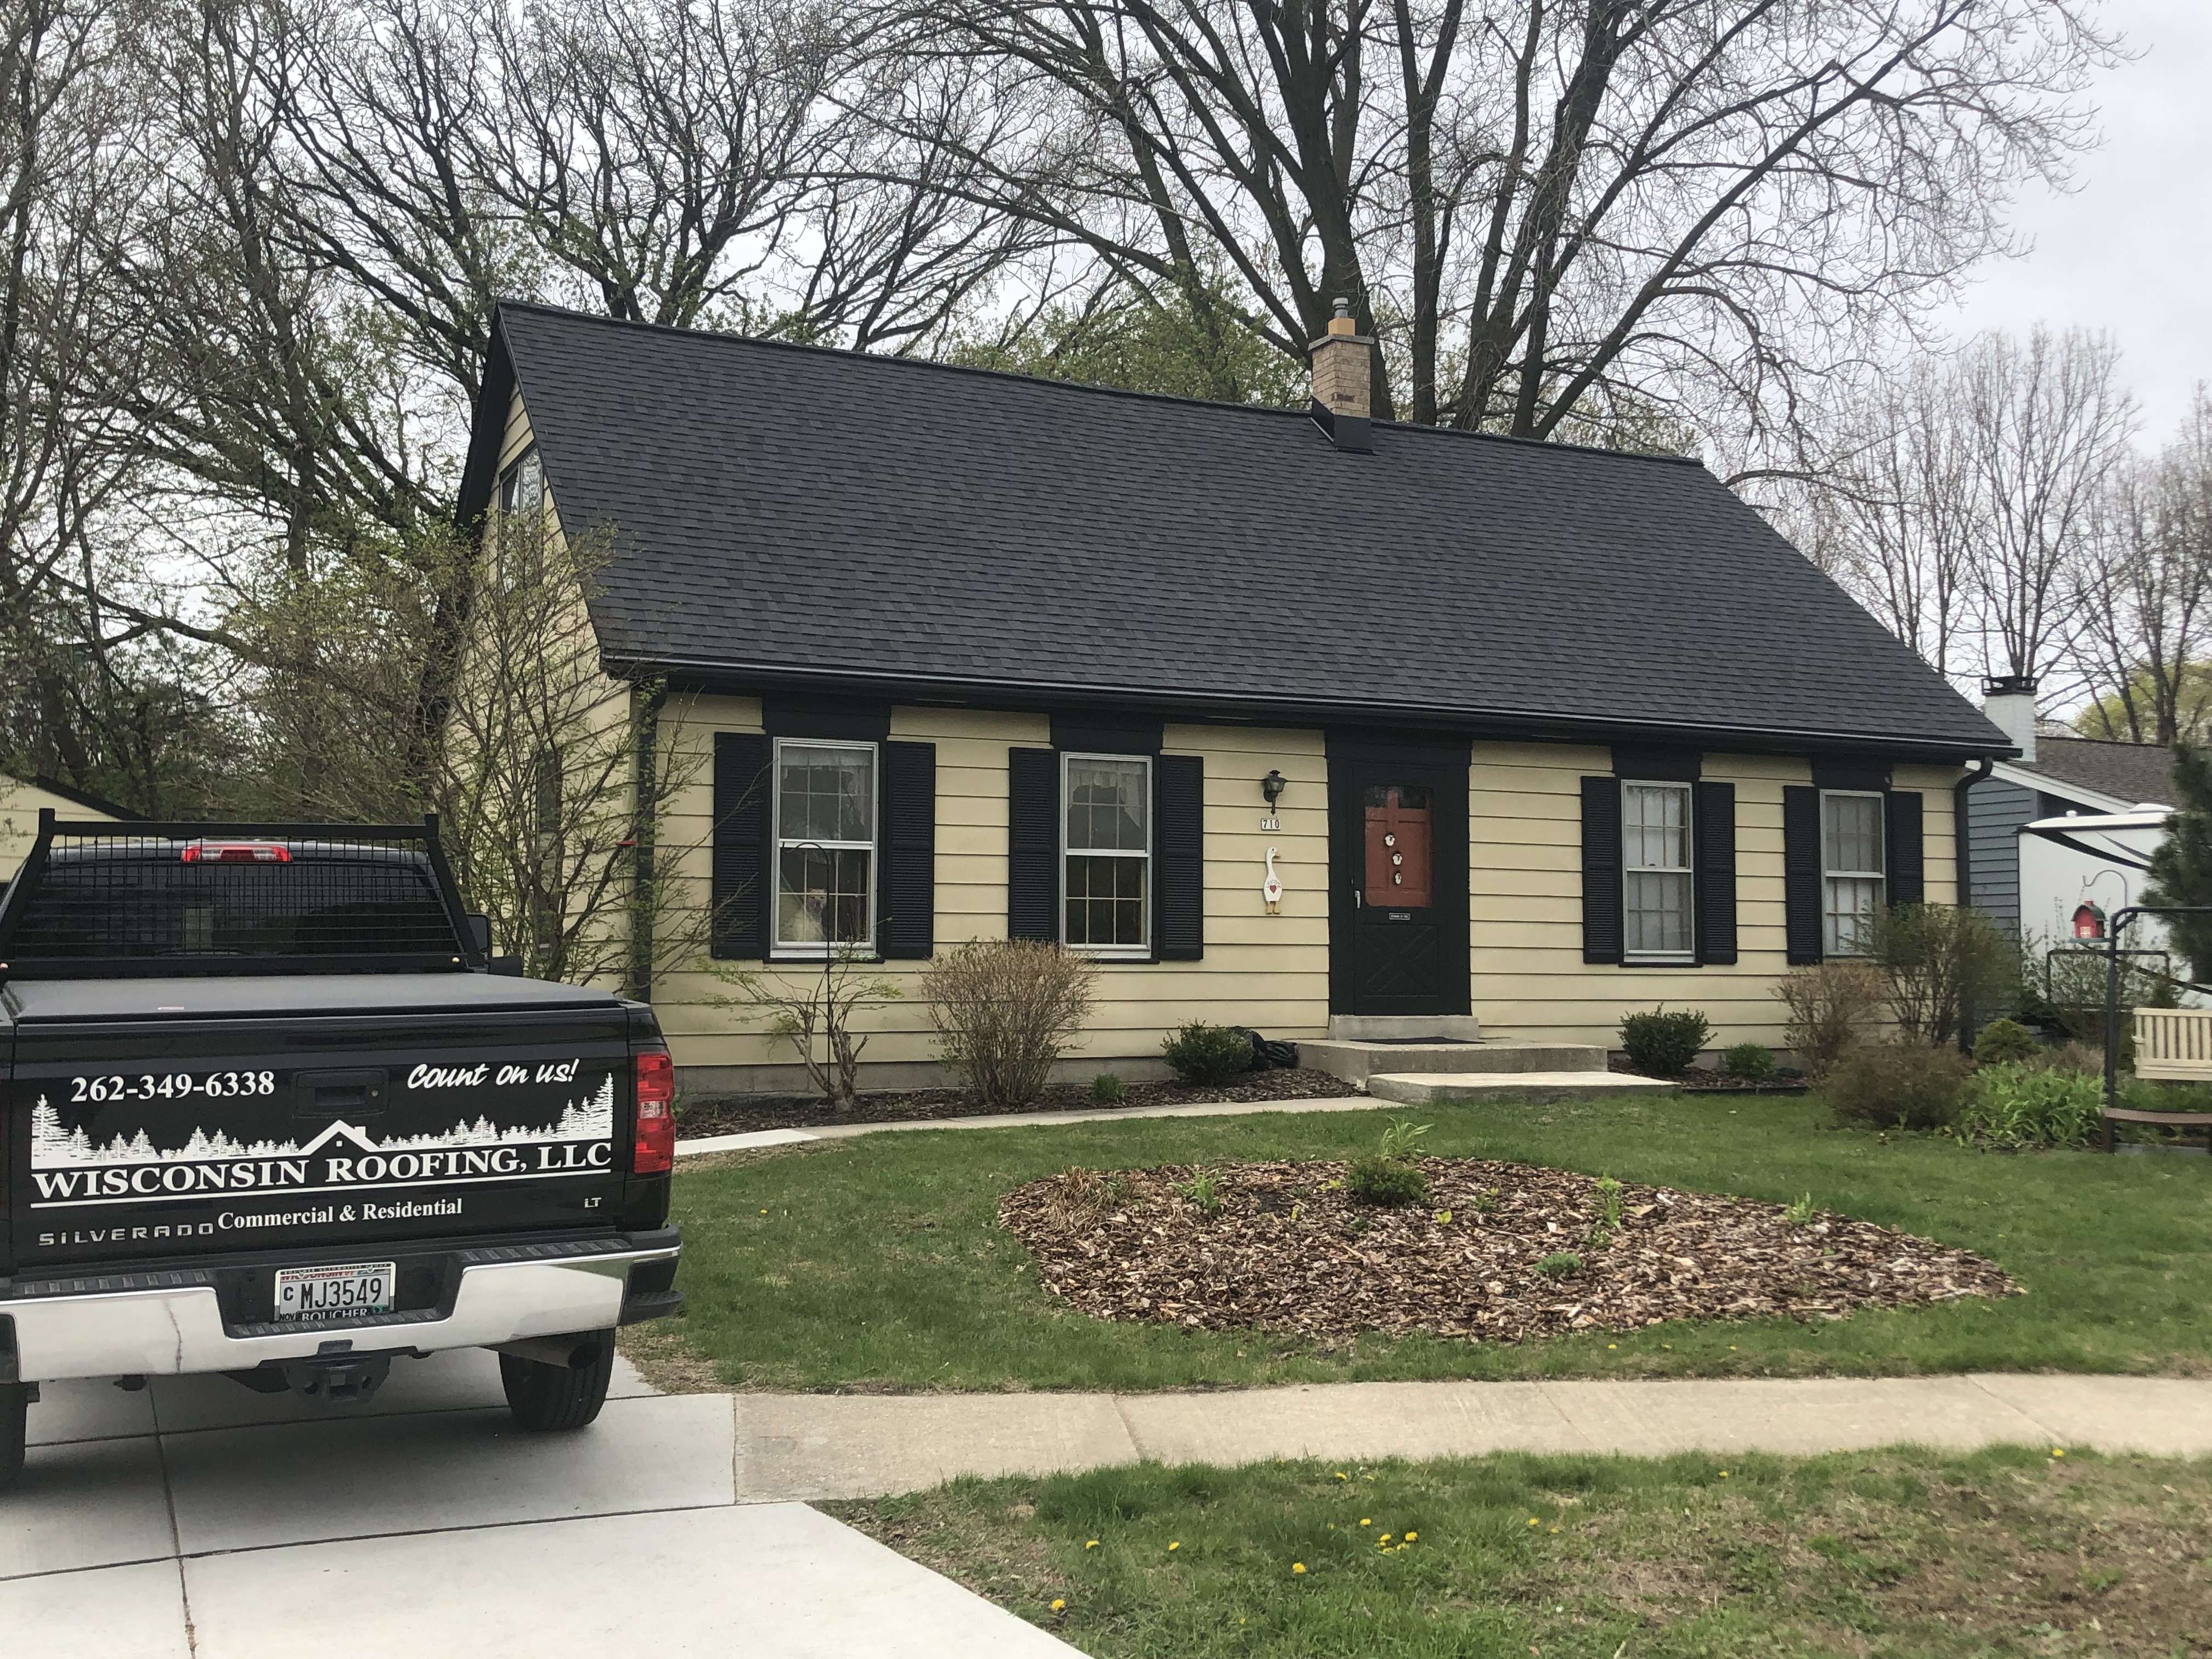 Wisconsin Roofing LLC | Waukesha | New Roof Moire Black | Mold Issues | Poor Ventilation | Re-Deck Entire Roof | Correct intake and Exhaust Ventilation